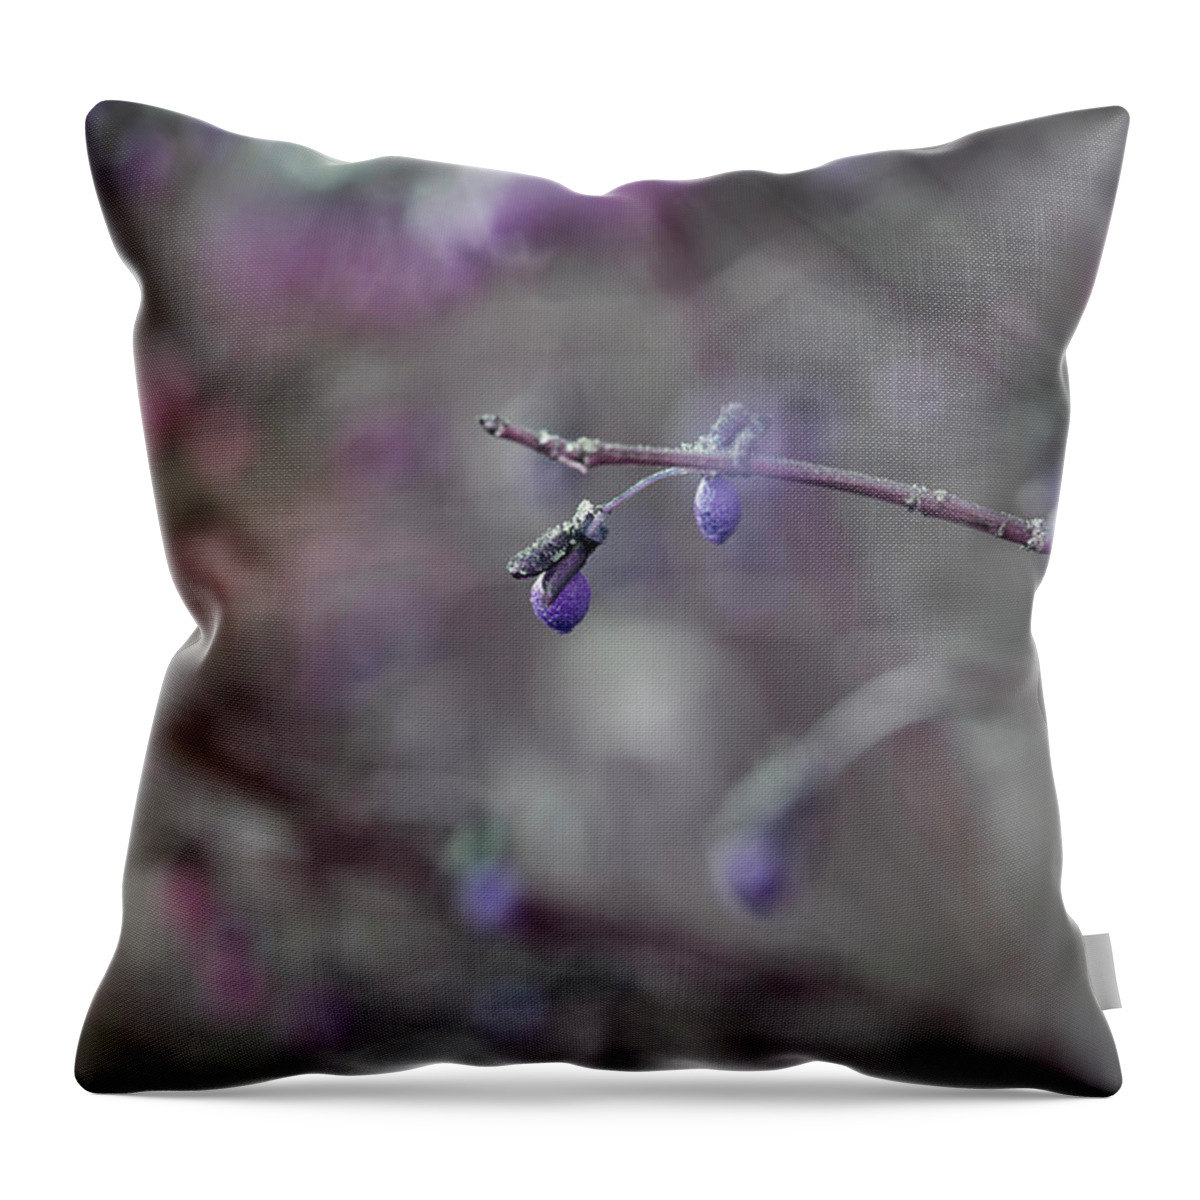 Tree Branch Throw Pillow featuring the photograph End Product by Mike Eingle